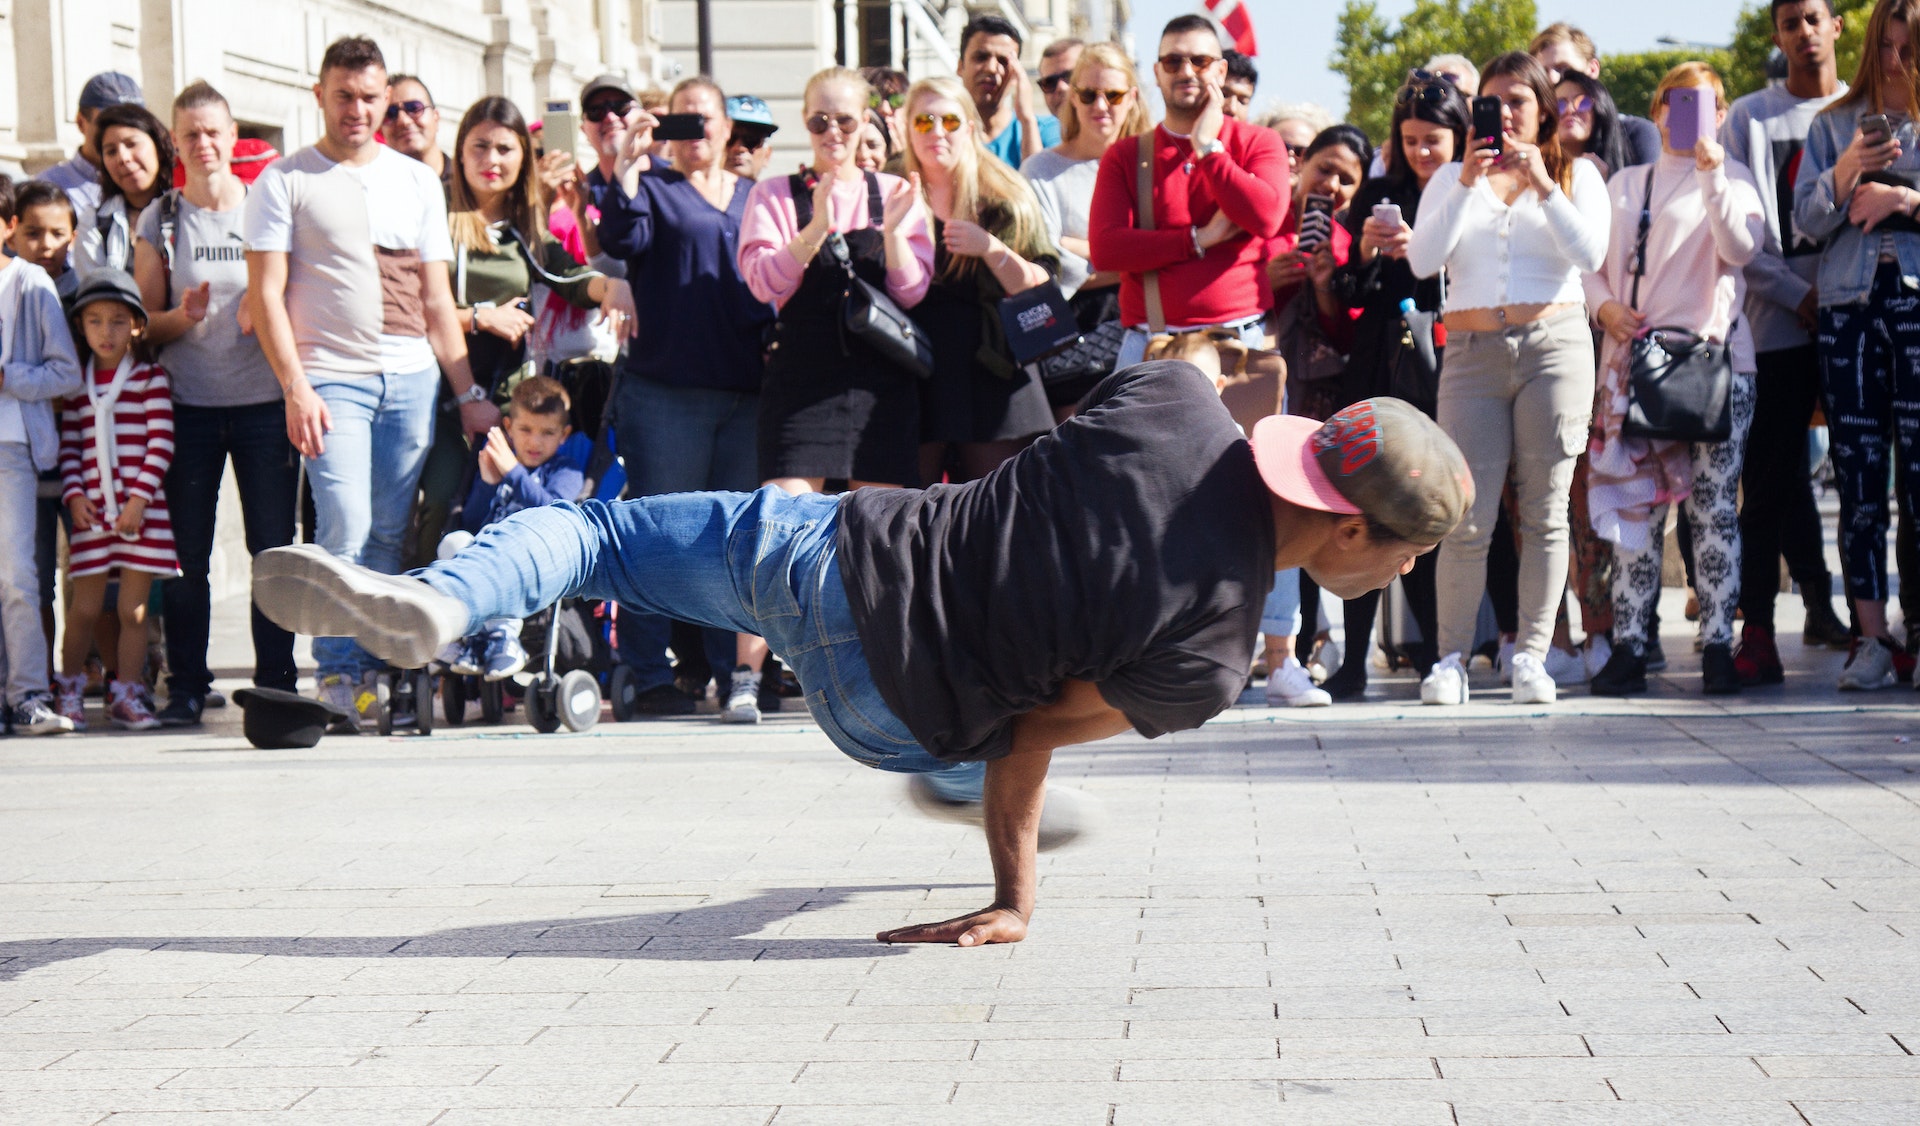 A break dancer performing in front of a crowd in the streets of Paris